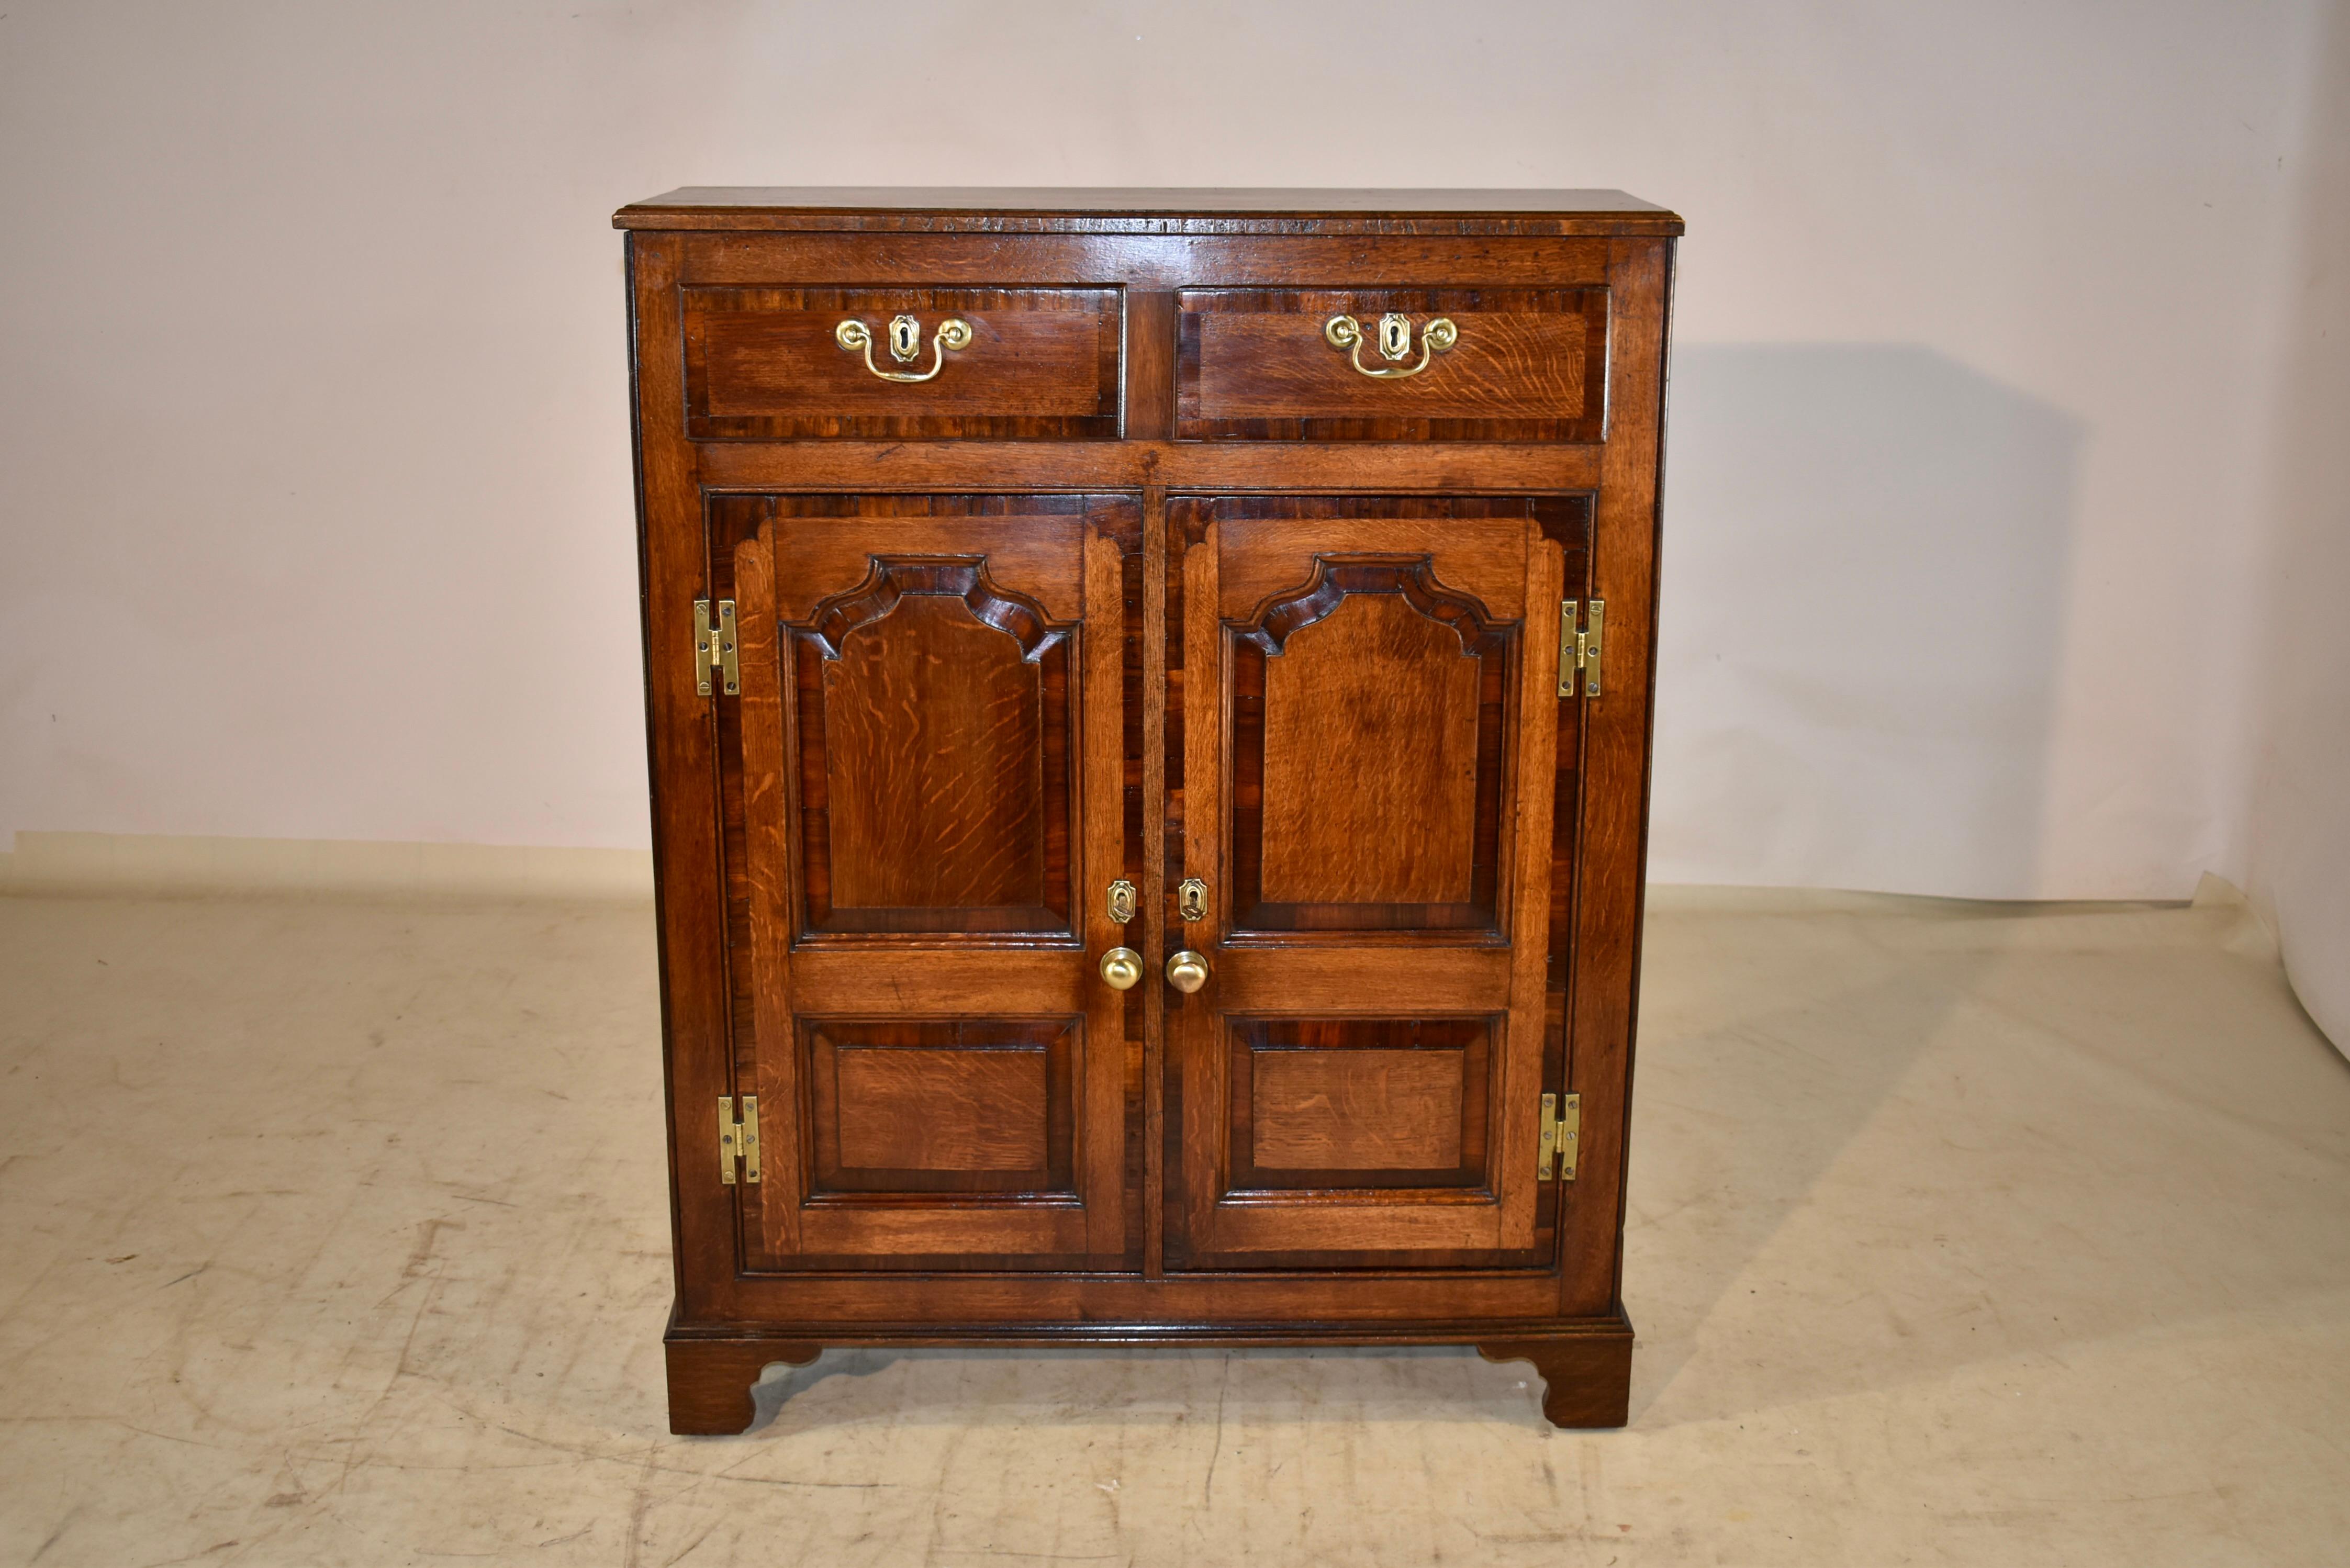 18th century oak and mahogany wall cupboard from the Lancashire region of England. The top has a molded edge and sits atop a gorgeous case. The sides are simple, and there are two drawers in the front, both banded in mahogany for added design